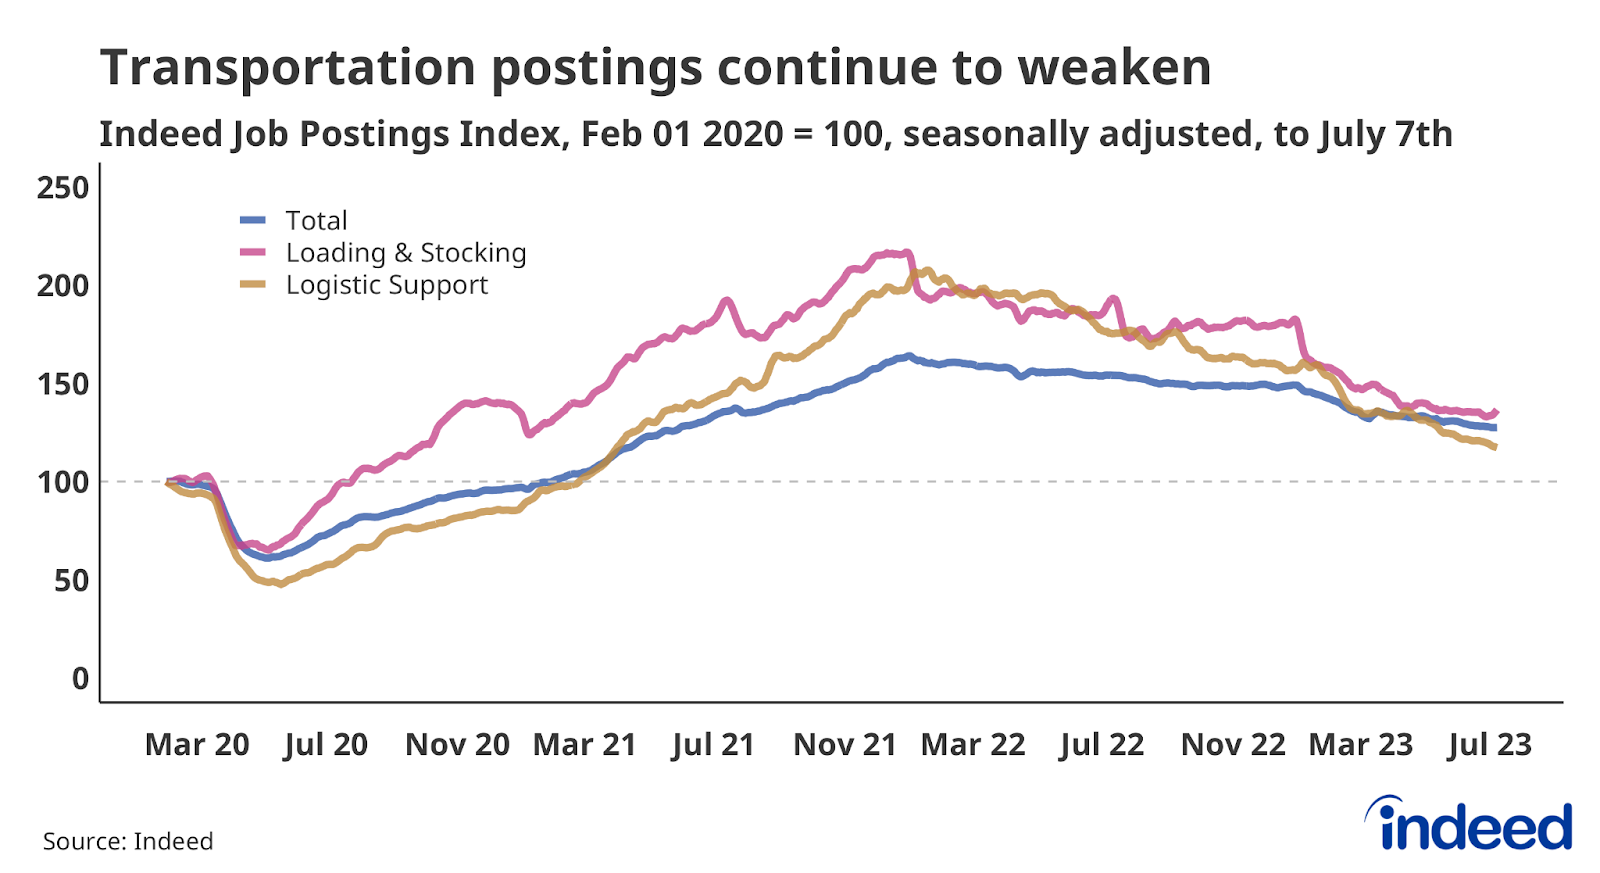 Line chart showing job postings in Loading & Stocking and Logistic Support to July 7th, 2023. Both of these segments have lost job postings over the past year.